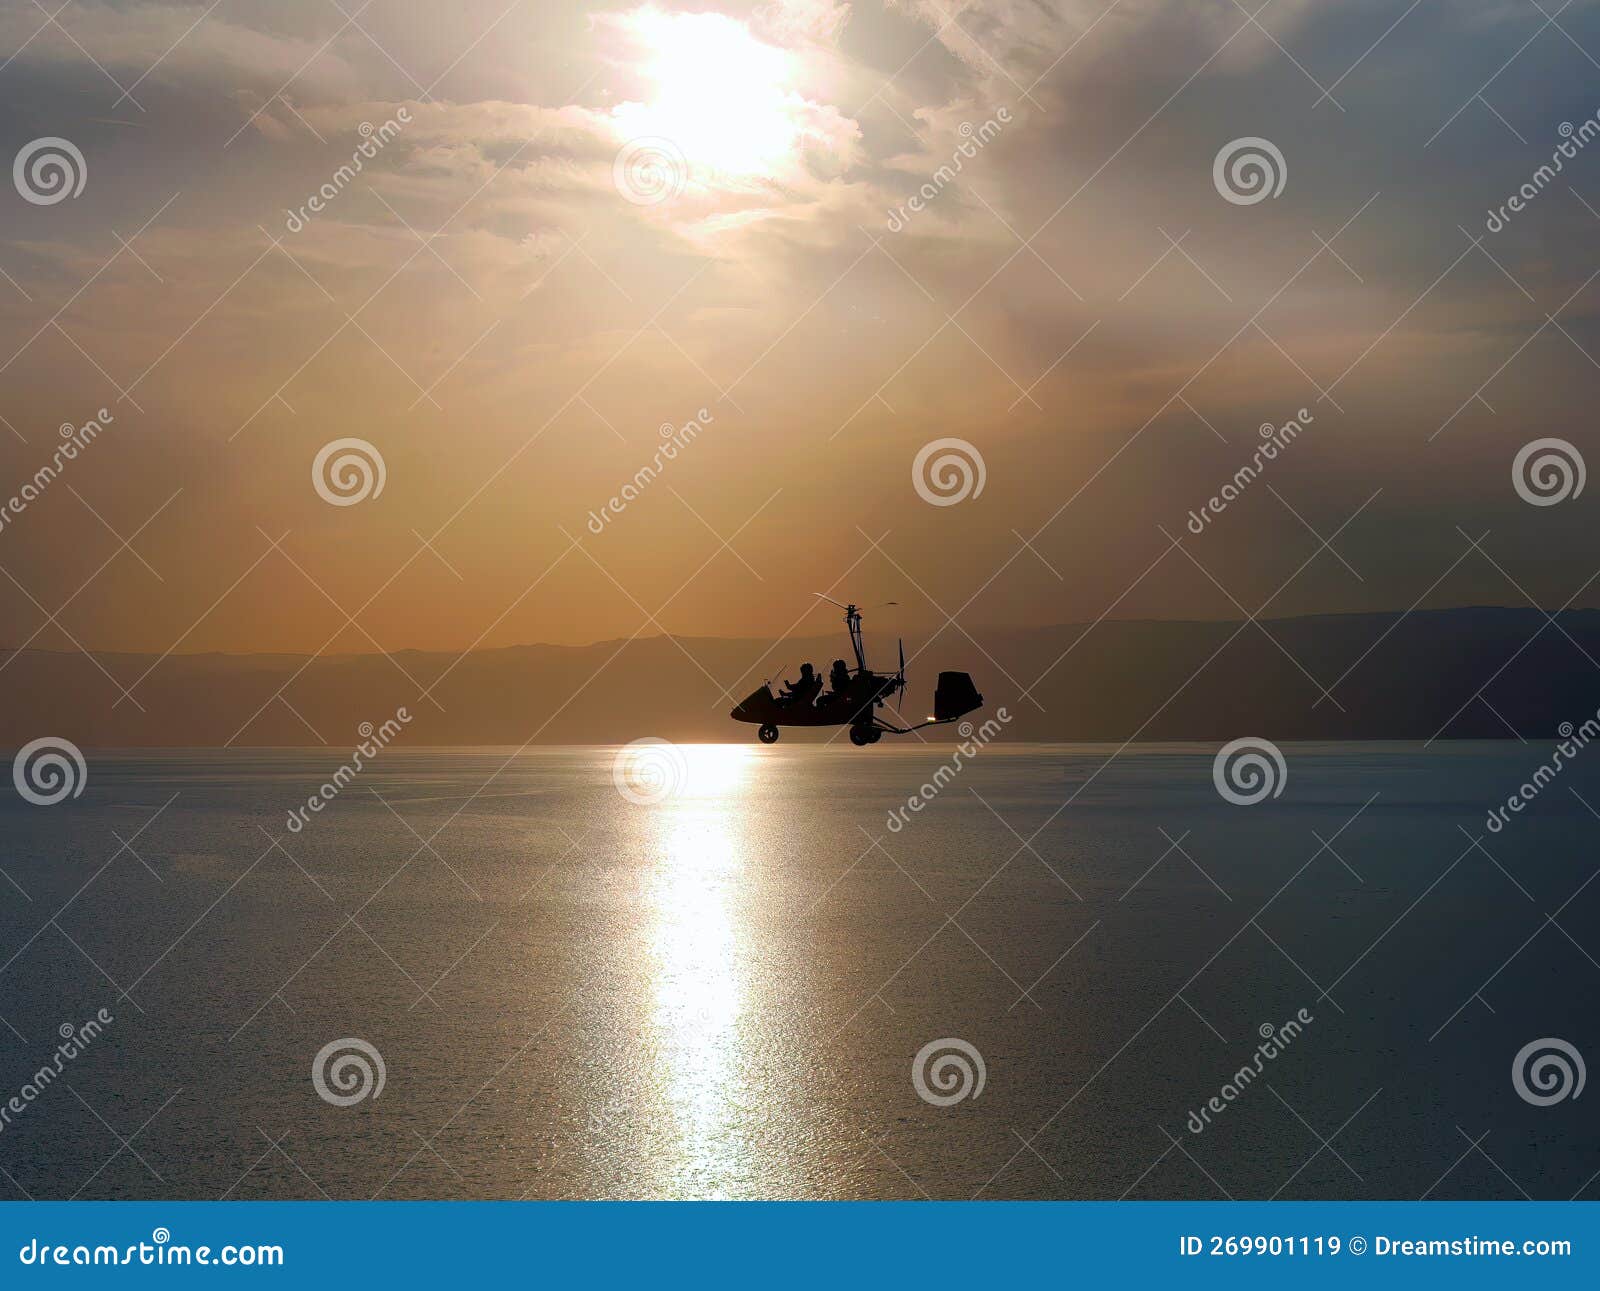 silhouette of gyrocopter, fun fly, aero sports, skydive, roto craft, gyroplane flying against sunset light over the dead sea,